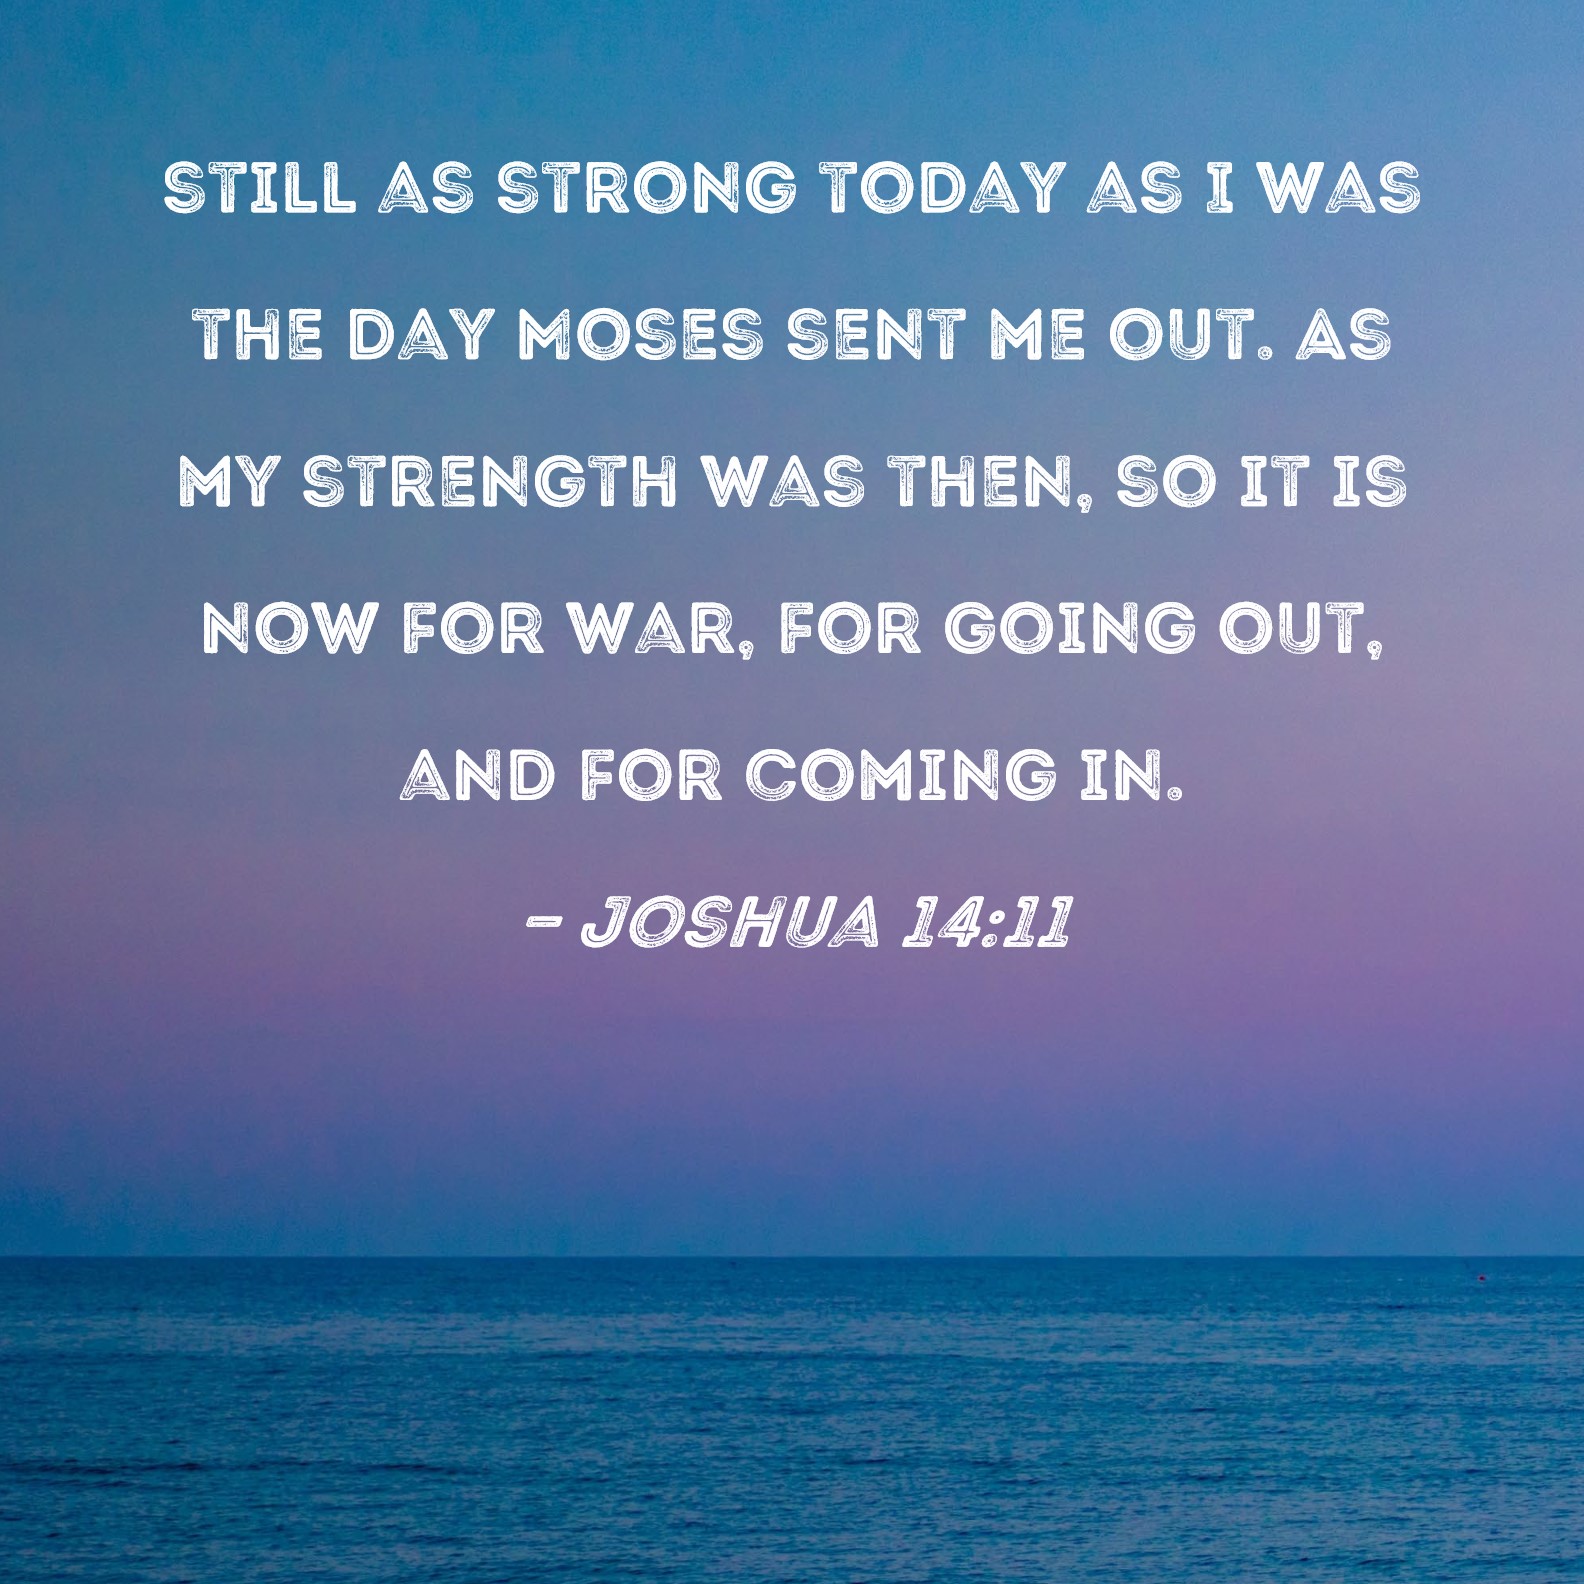 Joshua 14:11 still as strong today as I was the day Moses sent me out. As  my strength was then, so it is now for war, for going out, and for coming